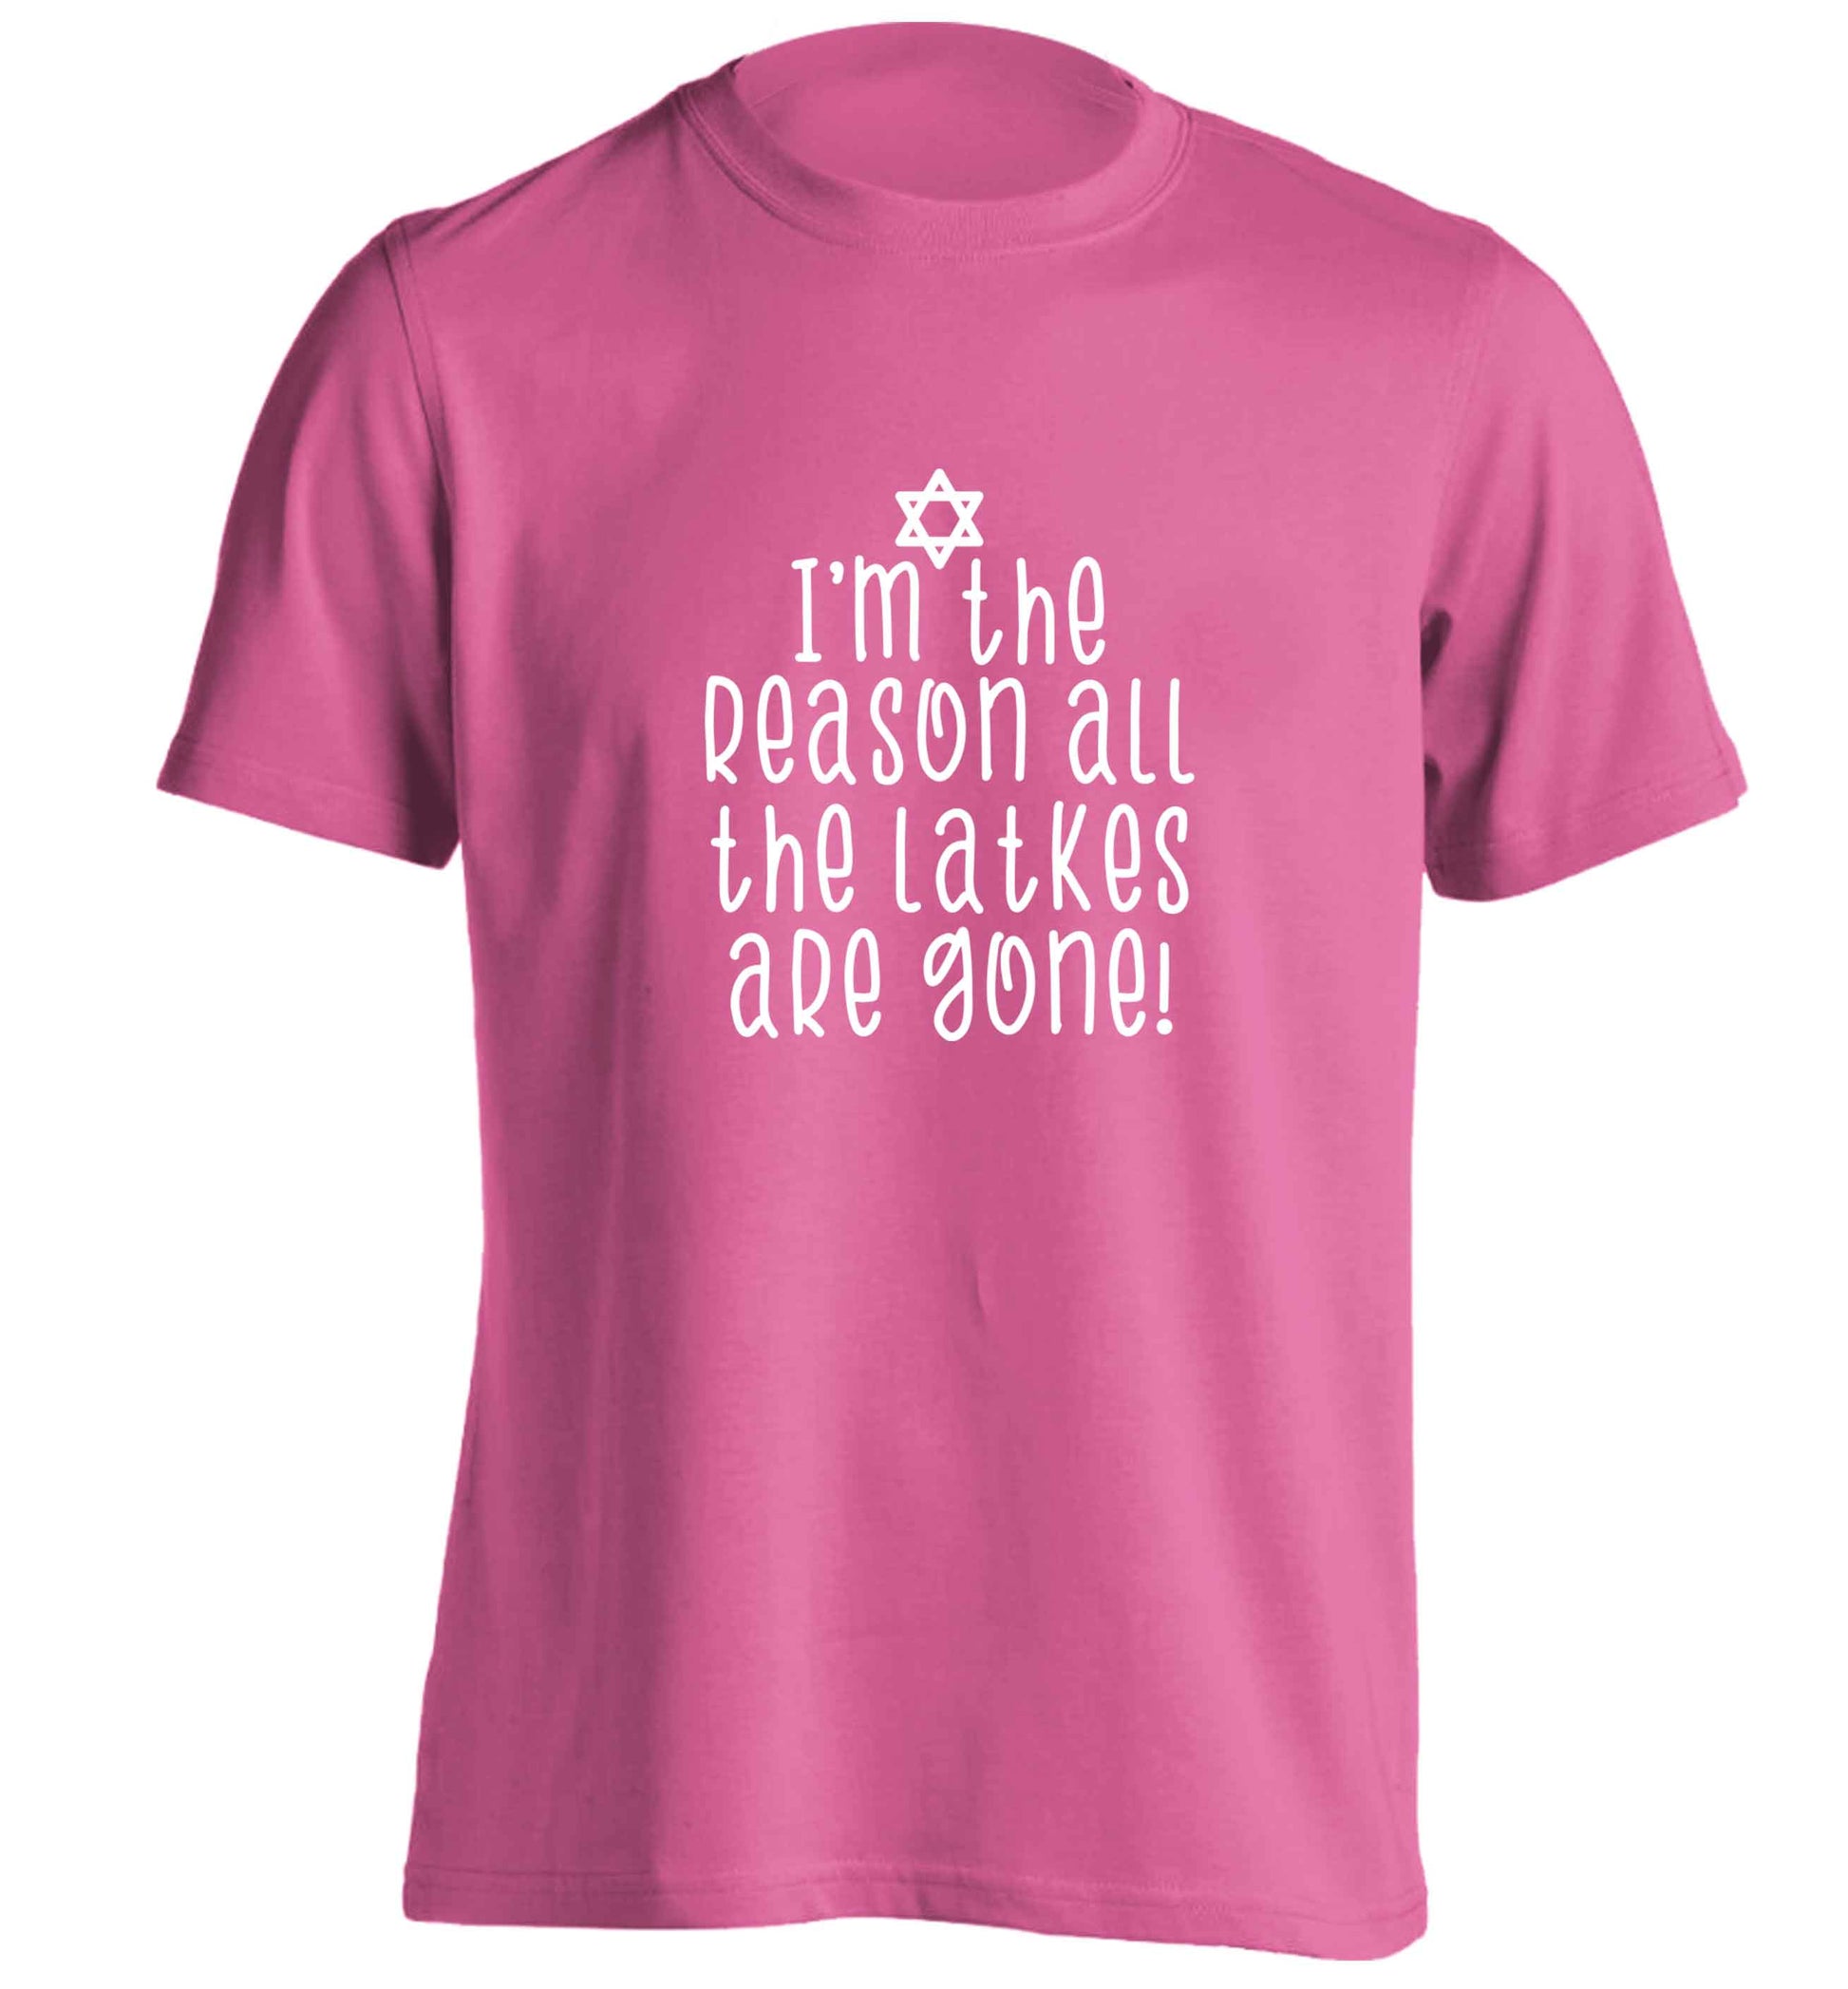 I'm the reason all the latkes are gone adults unisex pink Tshirt 2XL